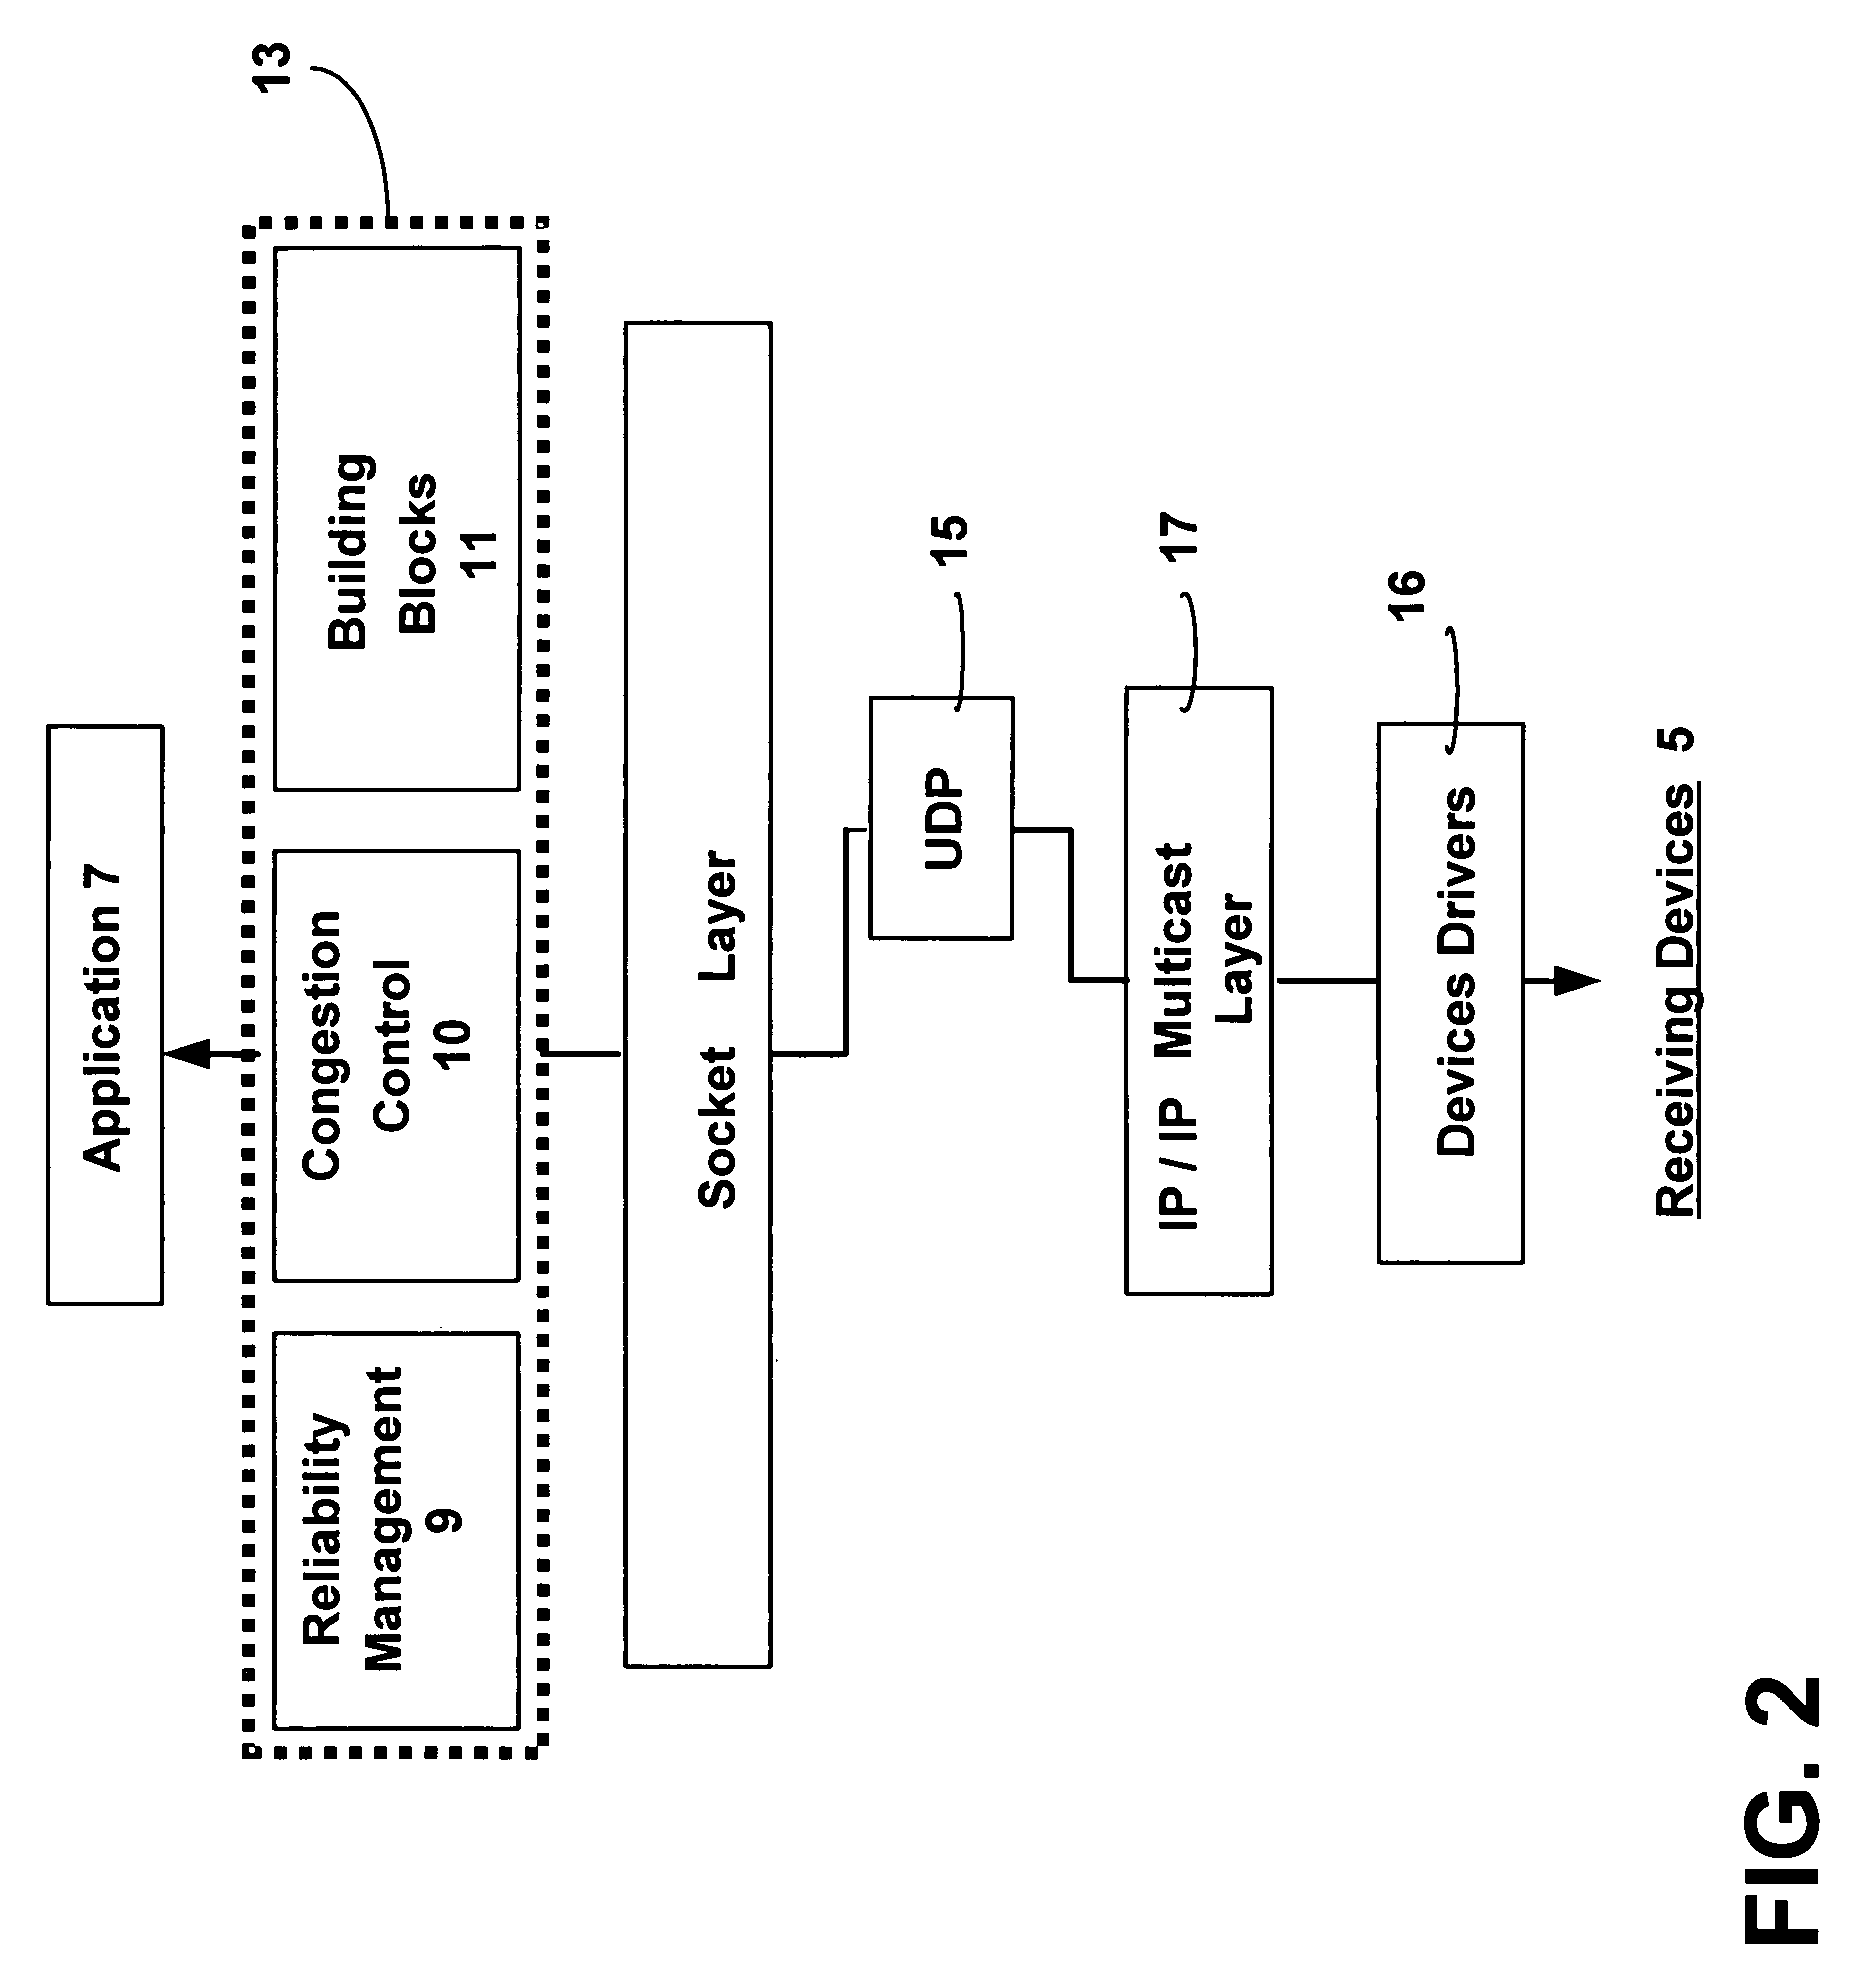 Apparatus, system, method and computer program product for reliable multicast transport of data packets